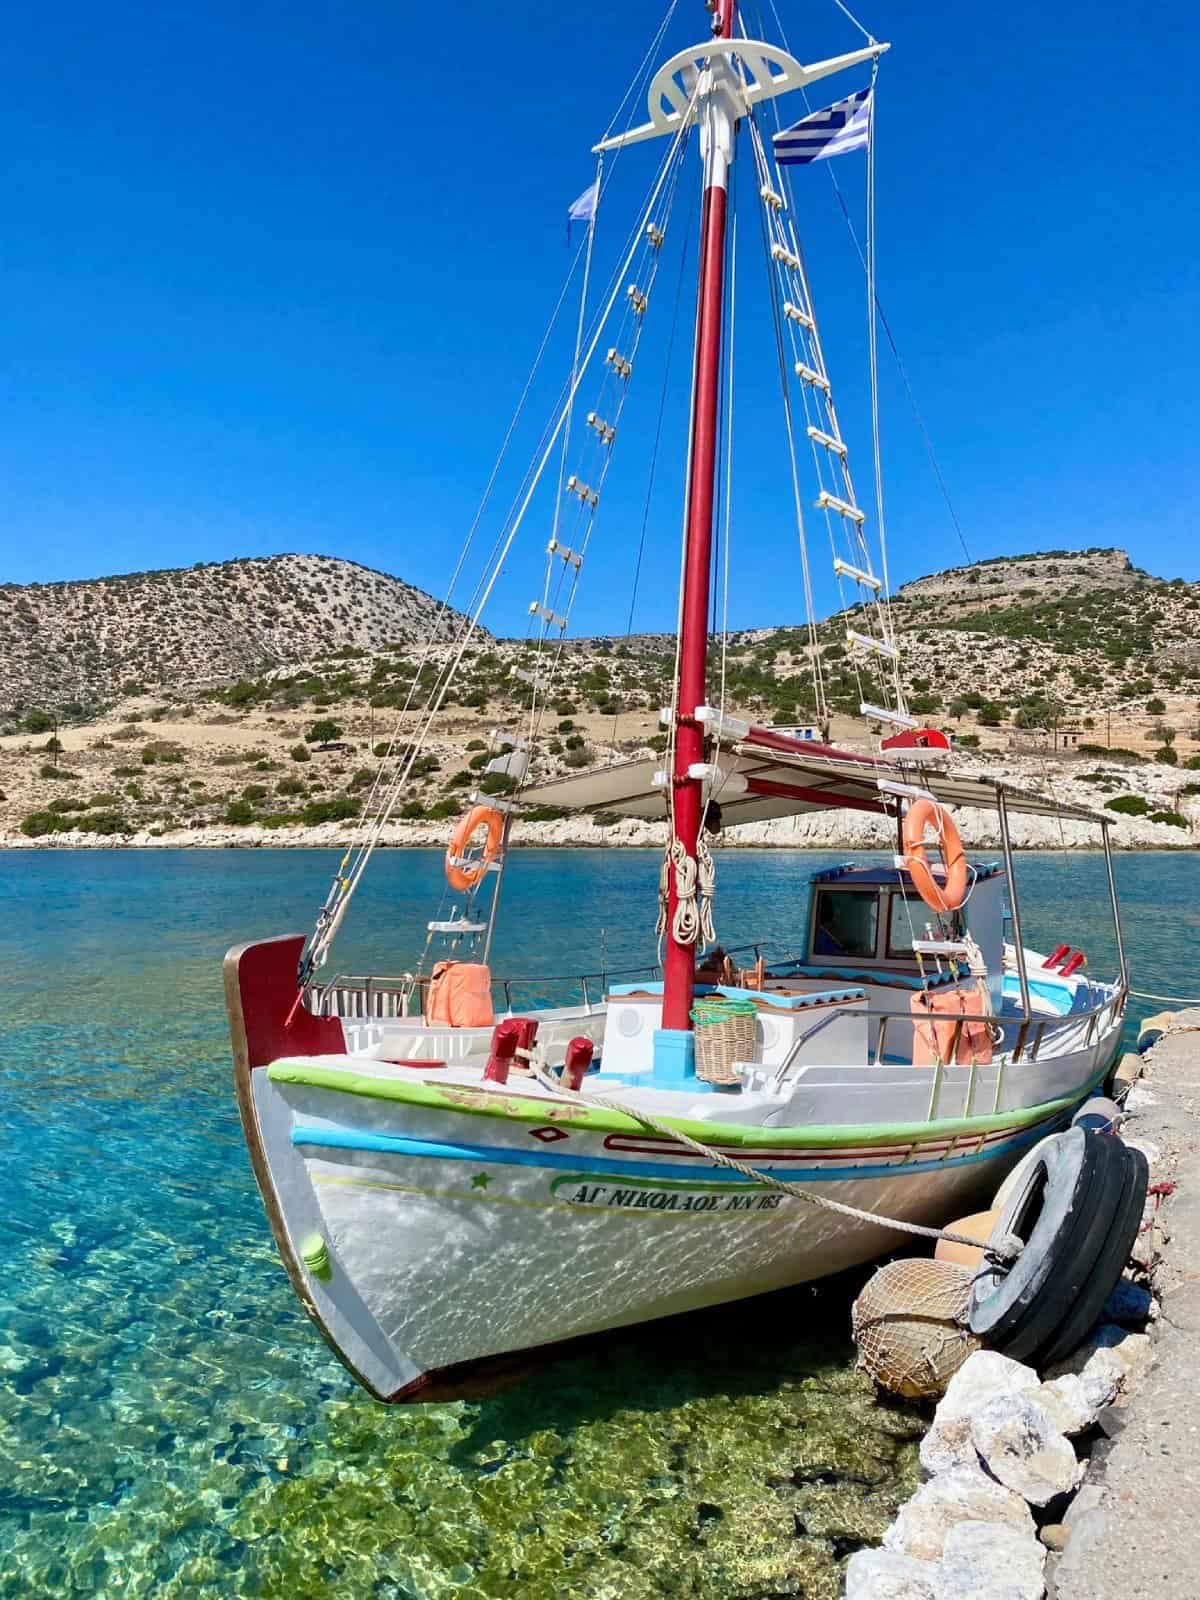 Things to do in Naxos - guide to planning a Naxos roadtrip itinerary - the remote southeast coast is stunning & worth a visit, including a boat trip from tiny Panermos